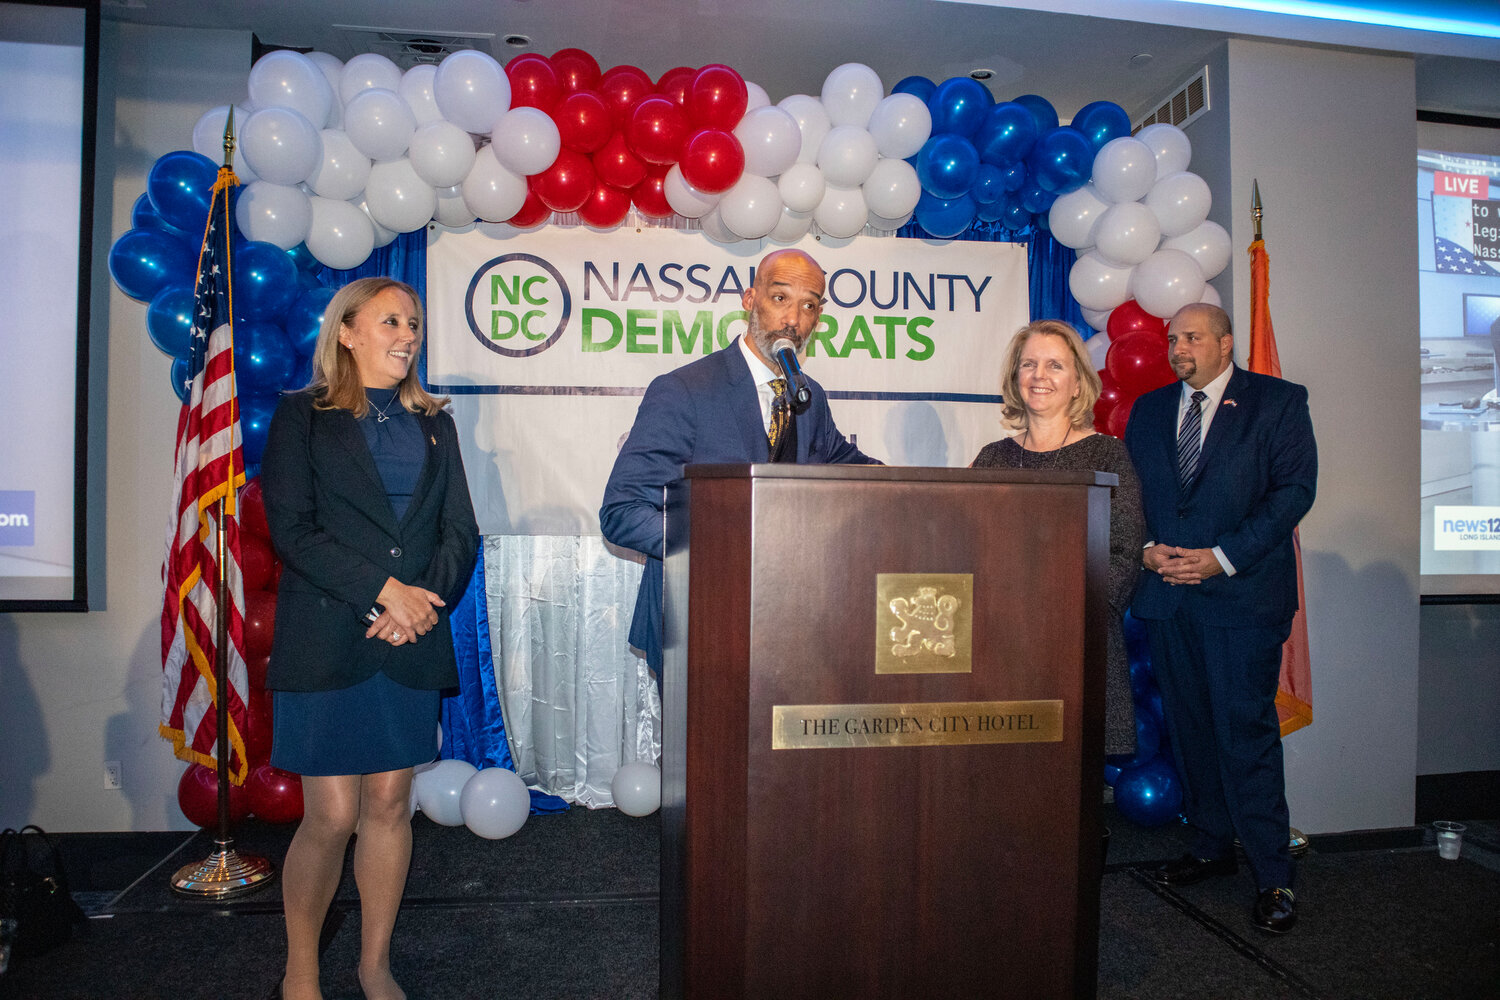 Democratic candidates, from left to right, Delia DeRiggi-Whitton, Scott Davis, Debra Mulé, and Seth Koslow won their races Tuesday evening. Mulé won with an unofficial vote of 3,042 to 2,086 beating her opponent Ben Jackson.